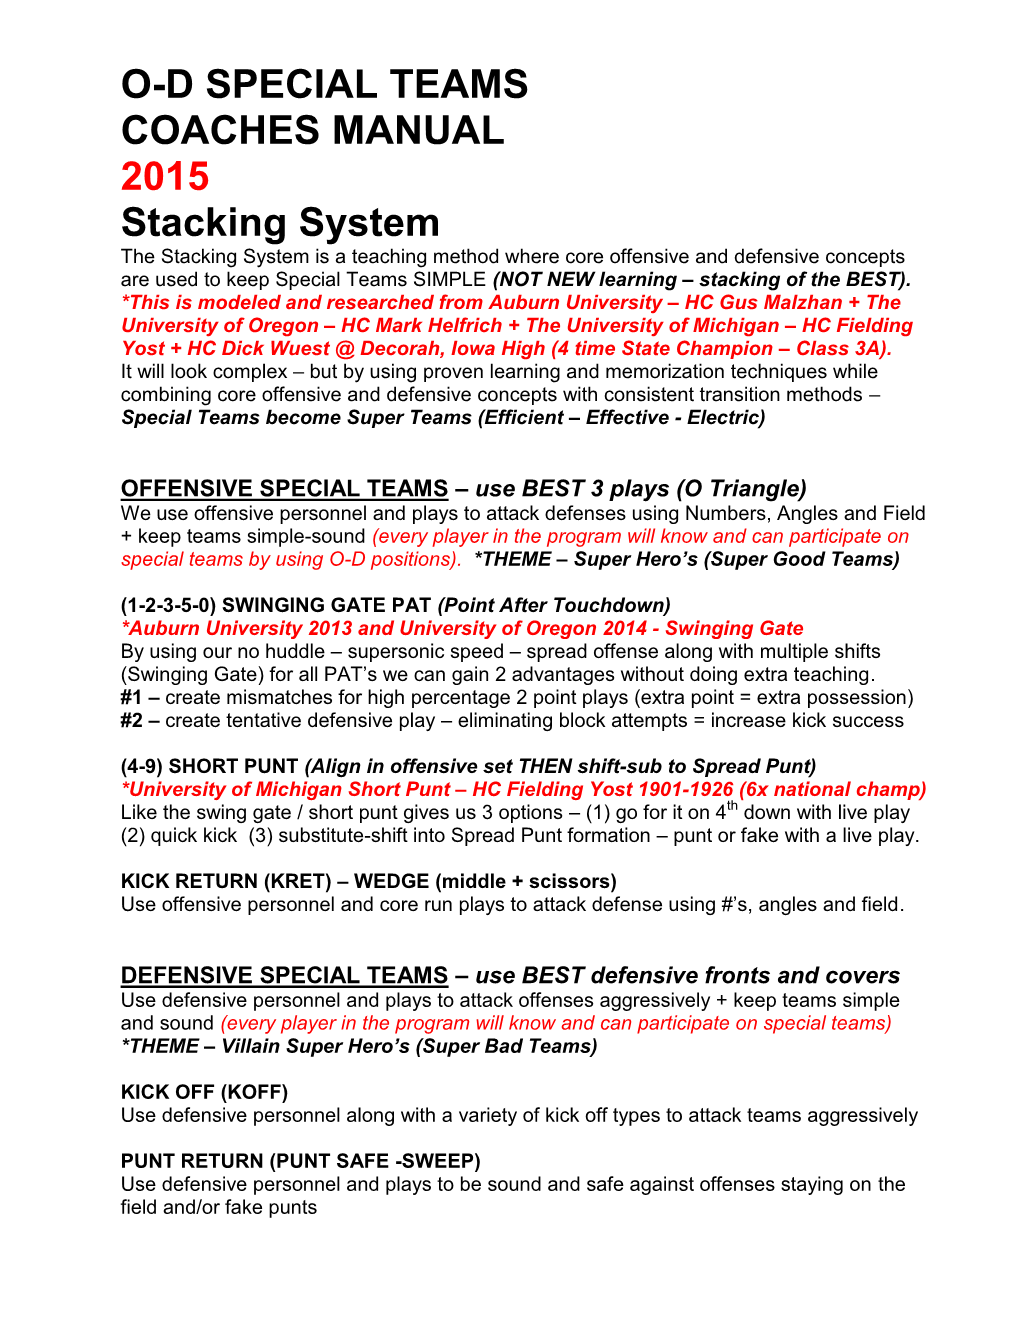 O-D SPECIAL TEAMS COACHES MANUAL 2015 Stacking System